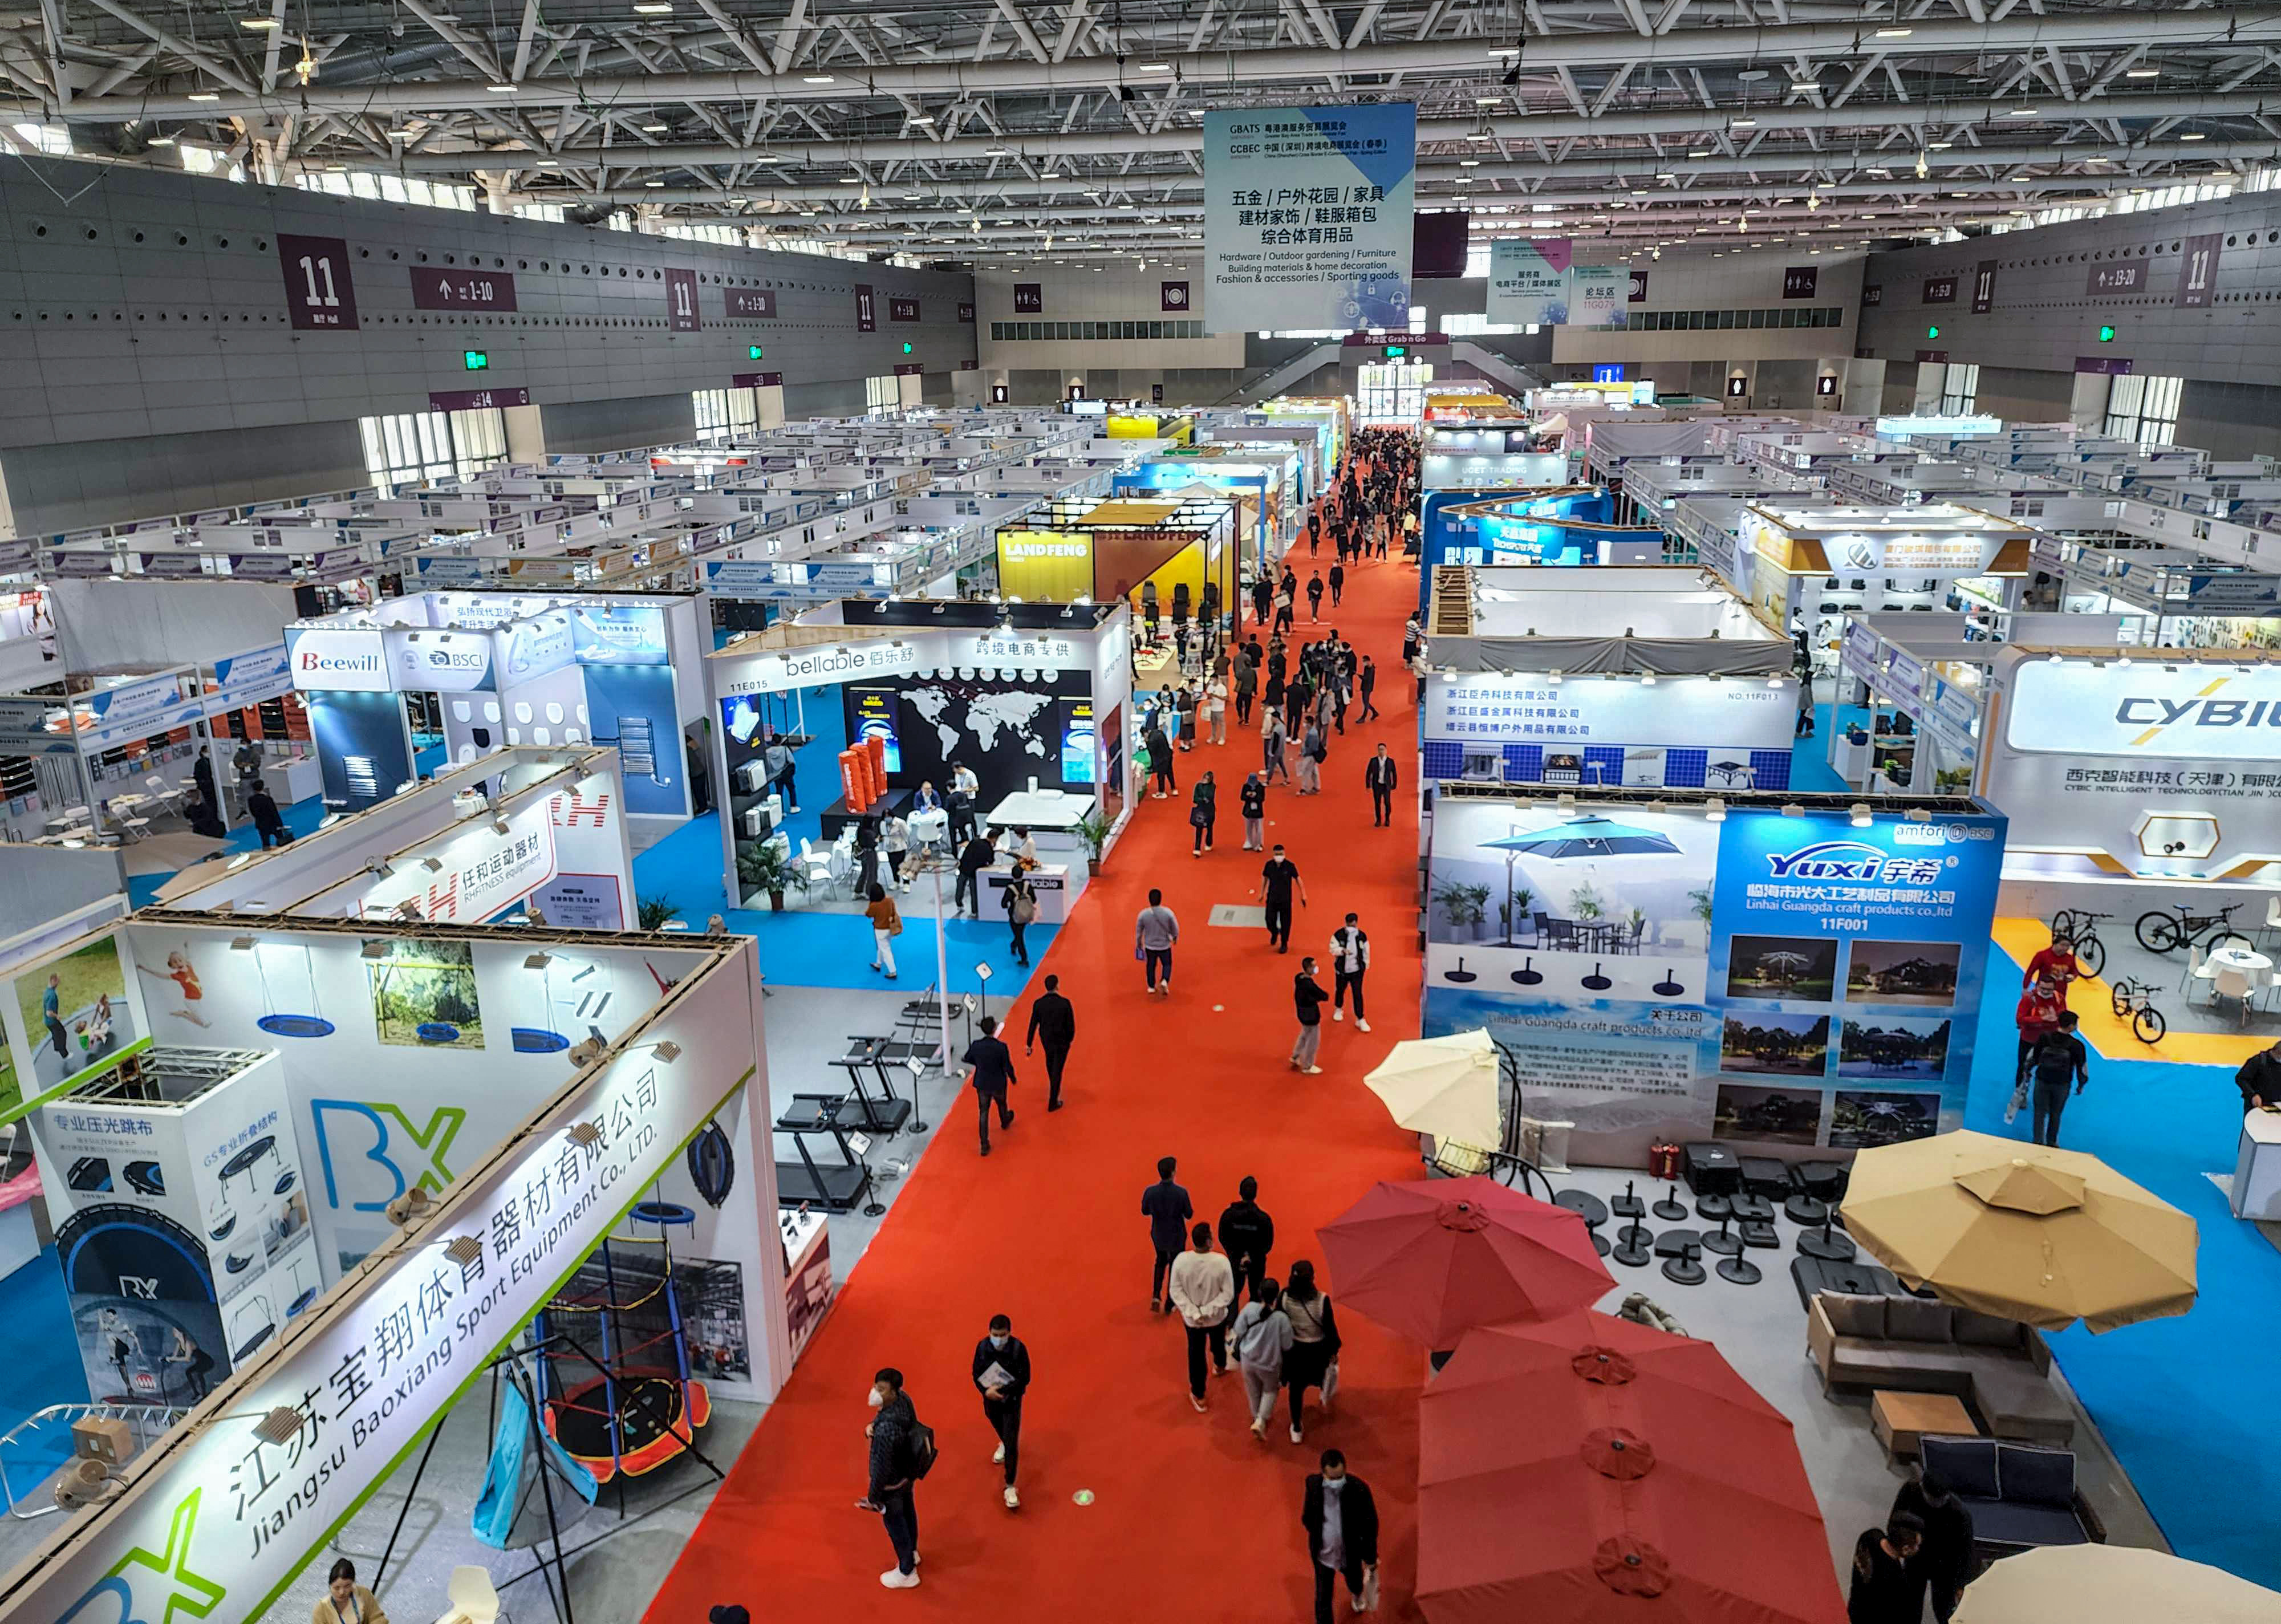 More than 100,000 visitors are estimated to have attended the three-day China (Shenzhen) Cross-border E-commerce Fair. Photo: Iris Ouyang